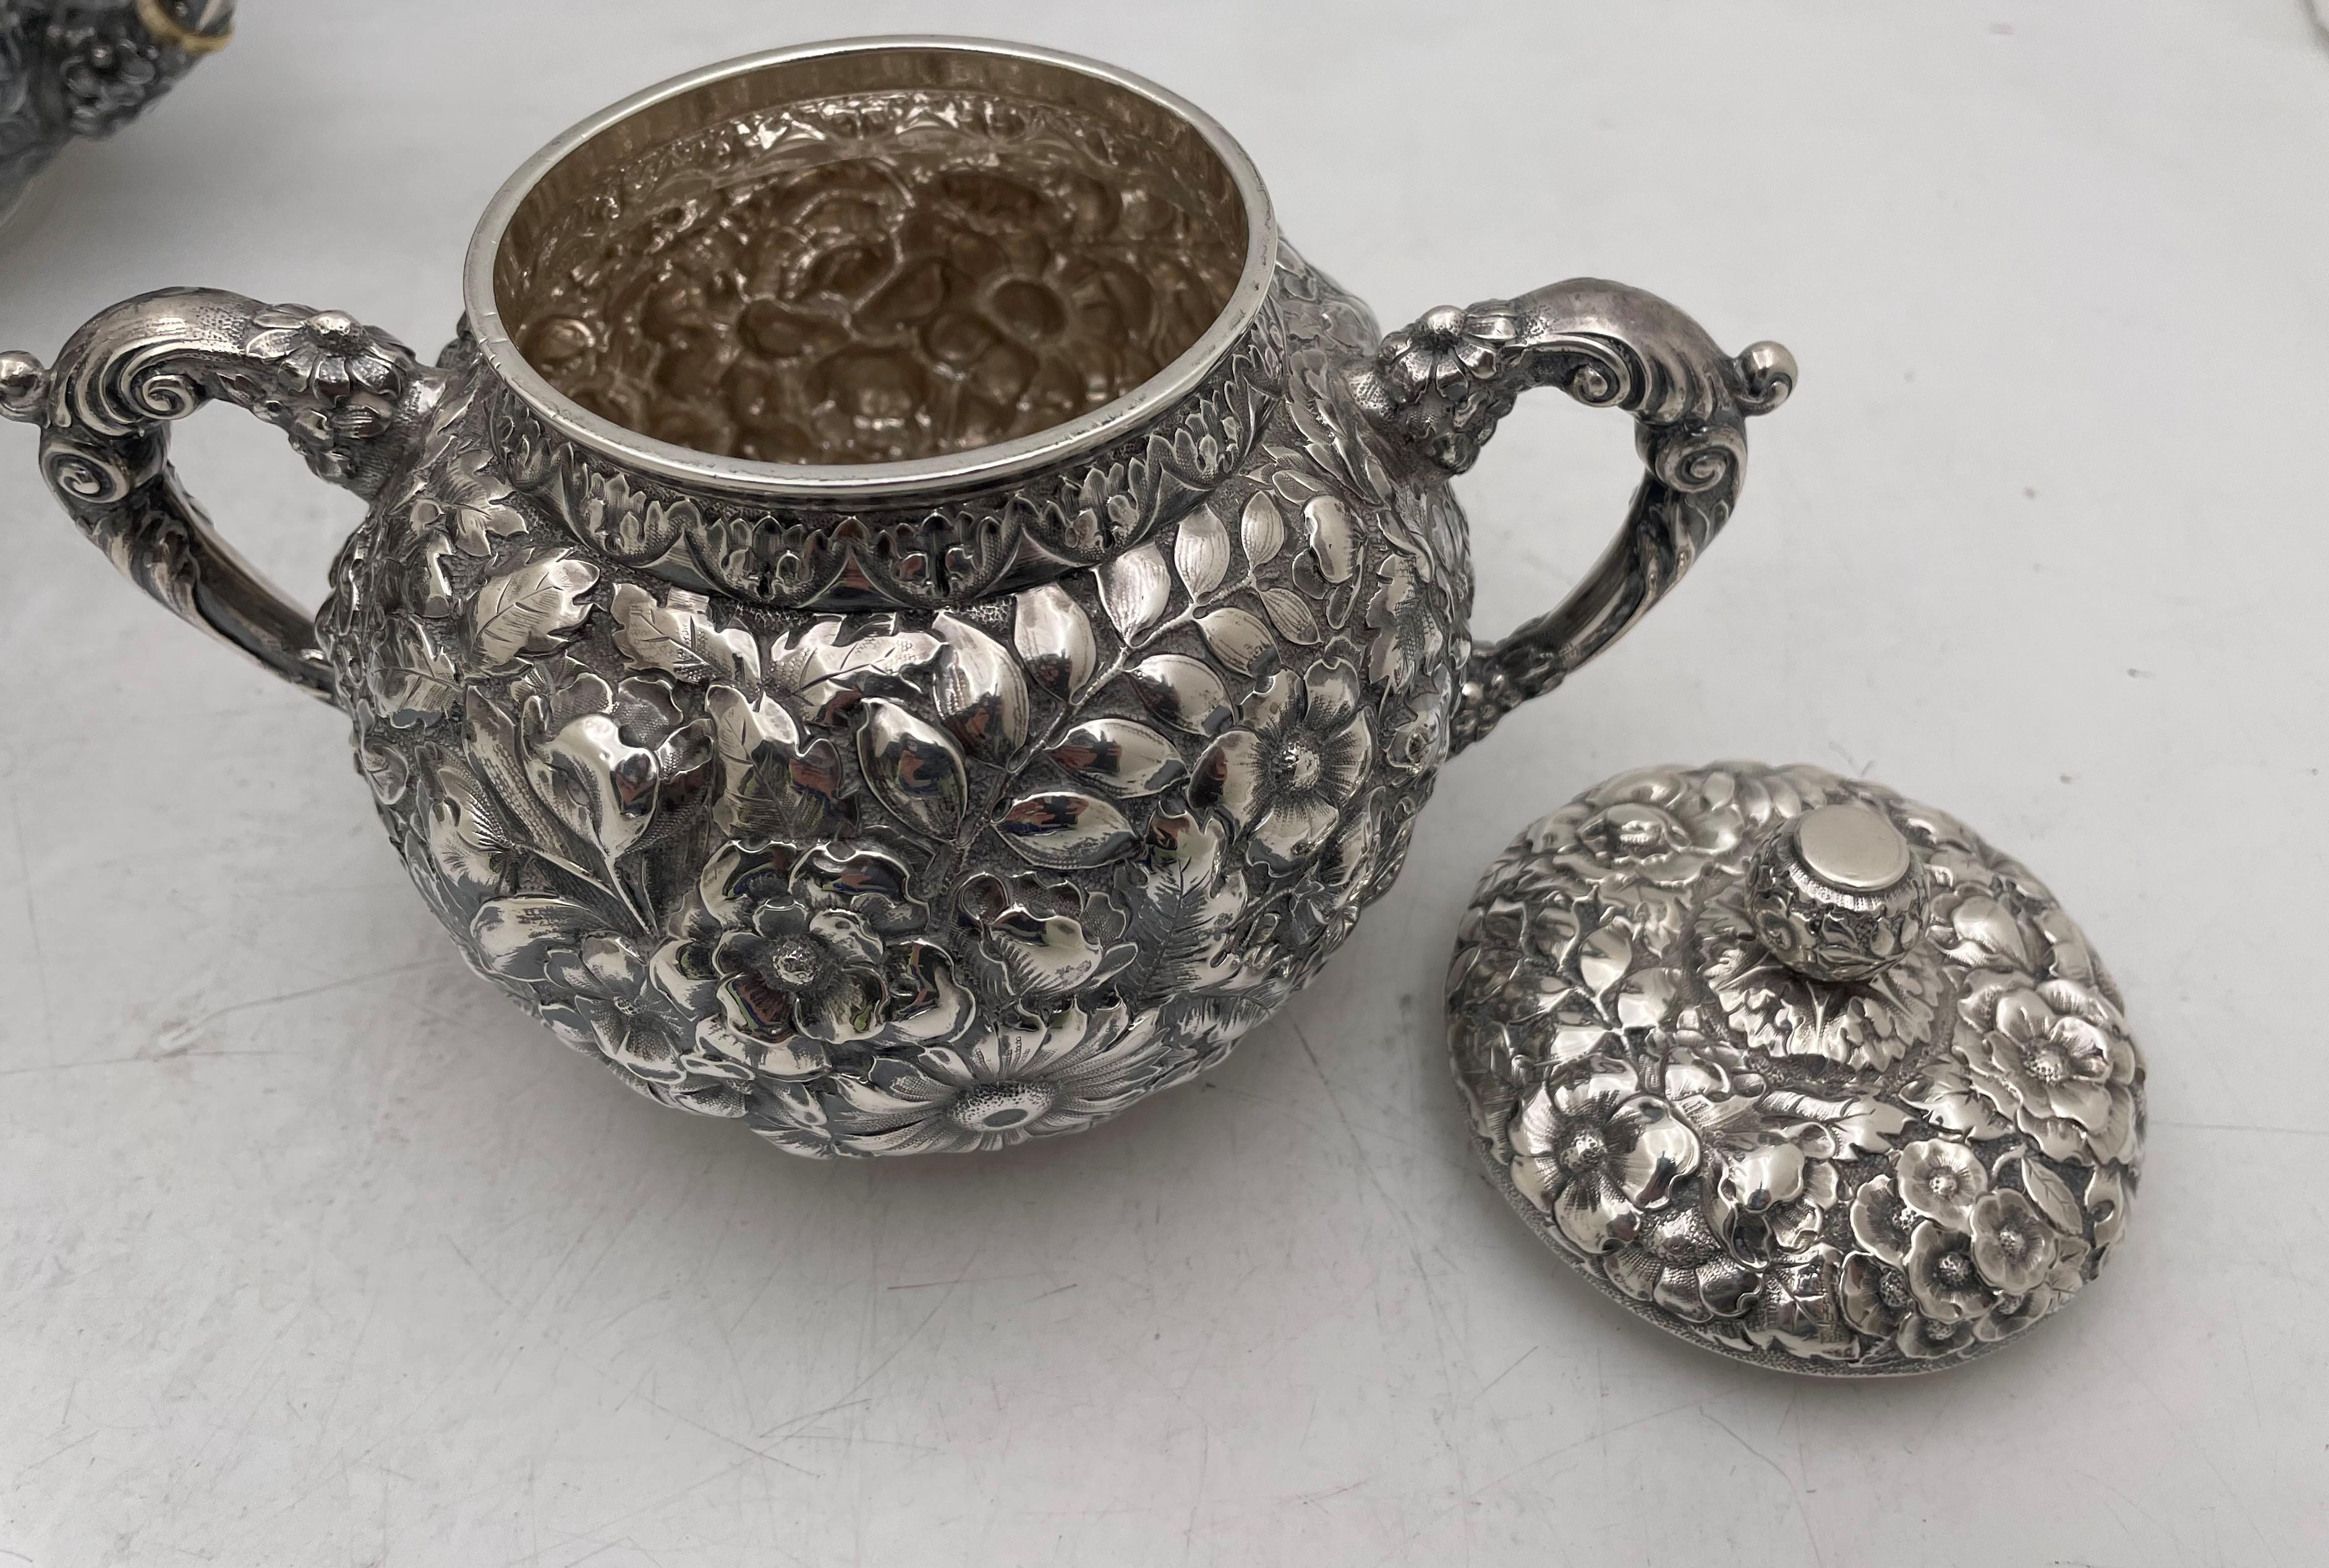 Wood & Hughes Sterling Silver 6-Piece Repousse 19th Century Tea Set with Tray For Sale 6